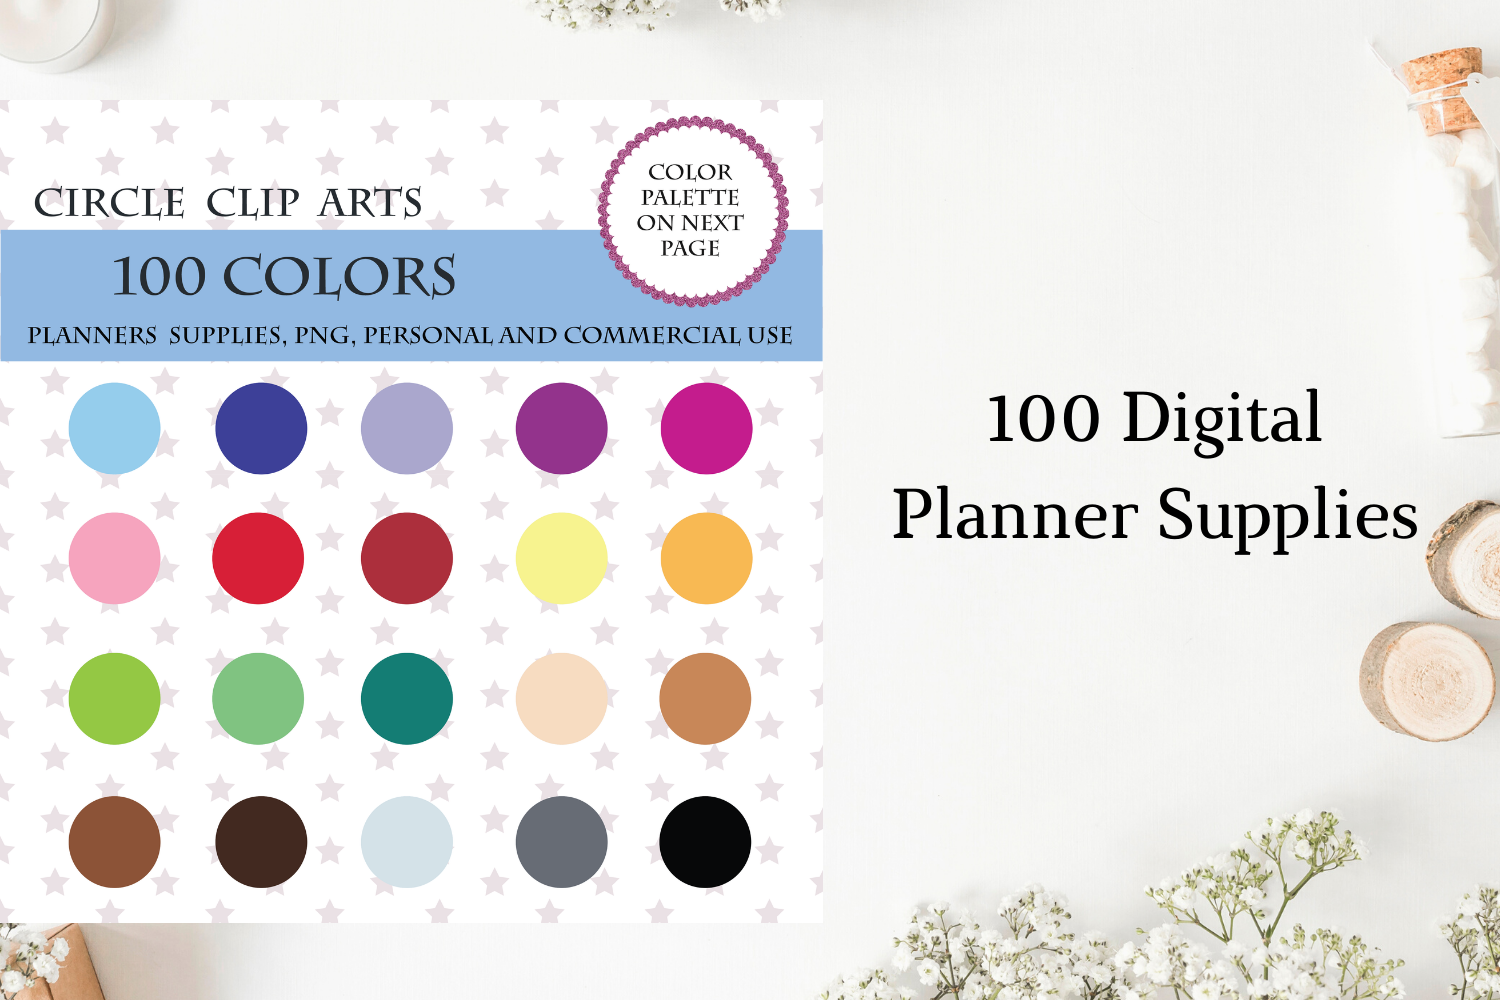 Dot Stickers For Bullet Journal 100 Circles Clipart Round Circles For Planner By Old Continent Design Thehungryjpeg Com